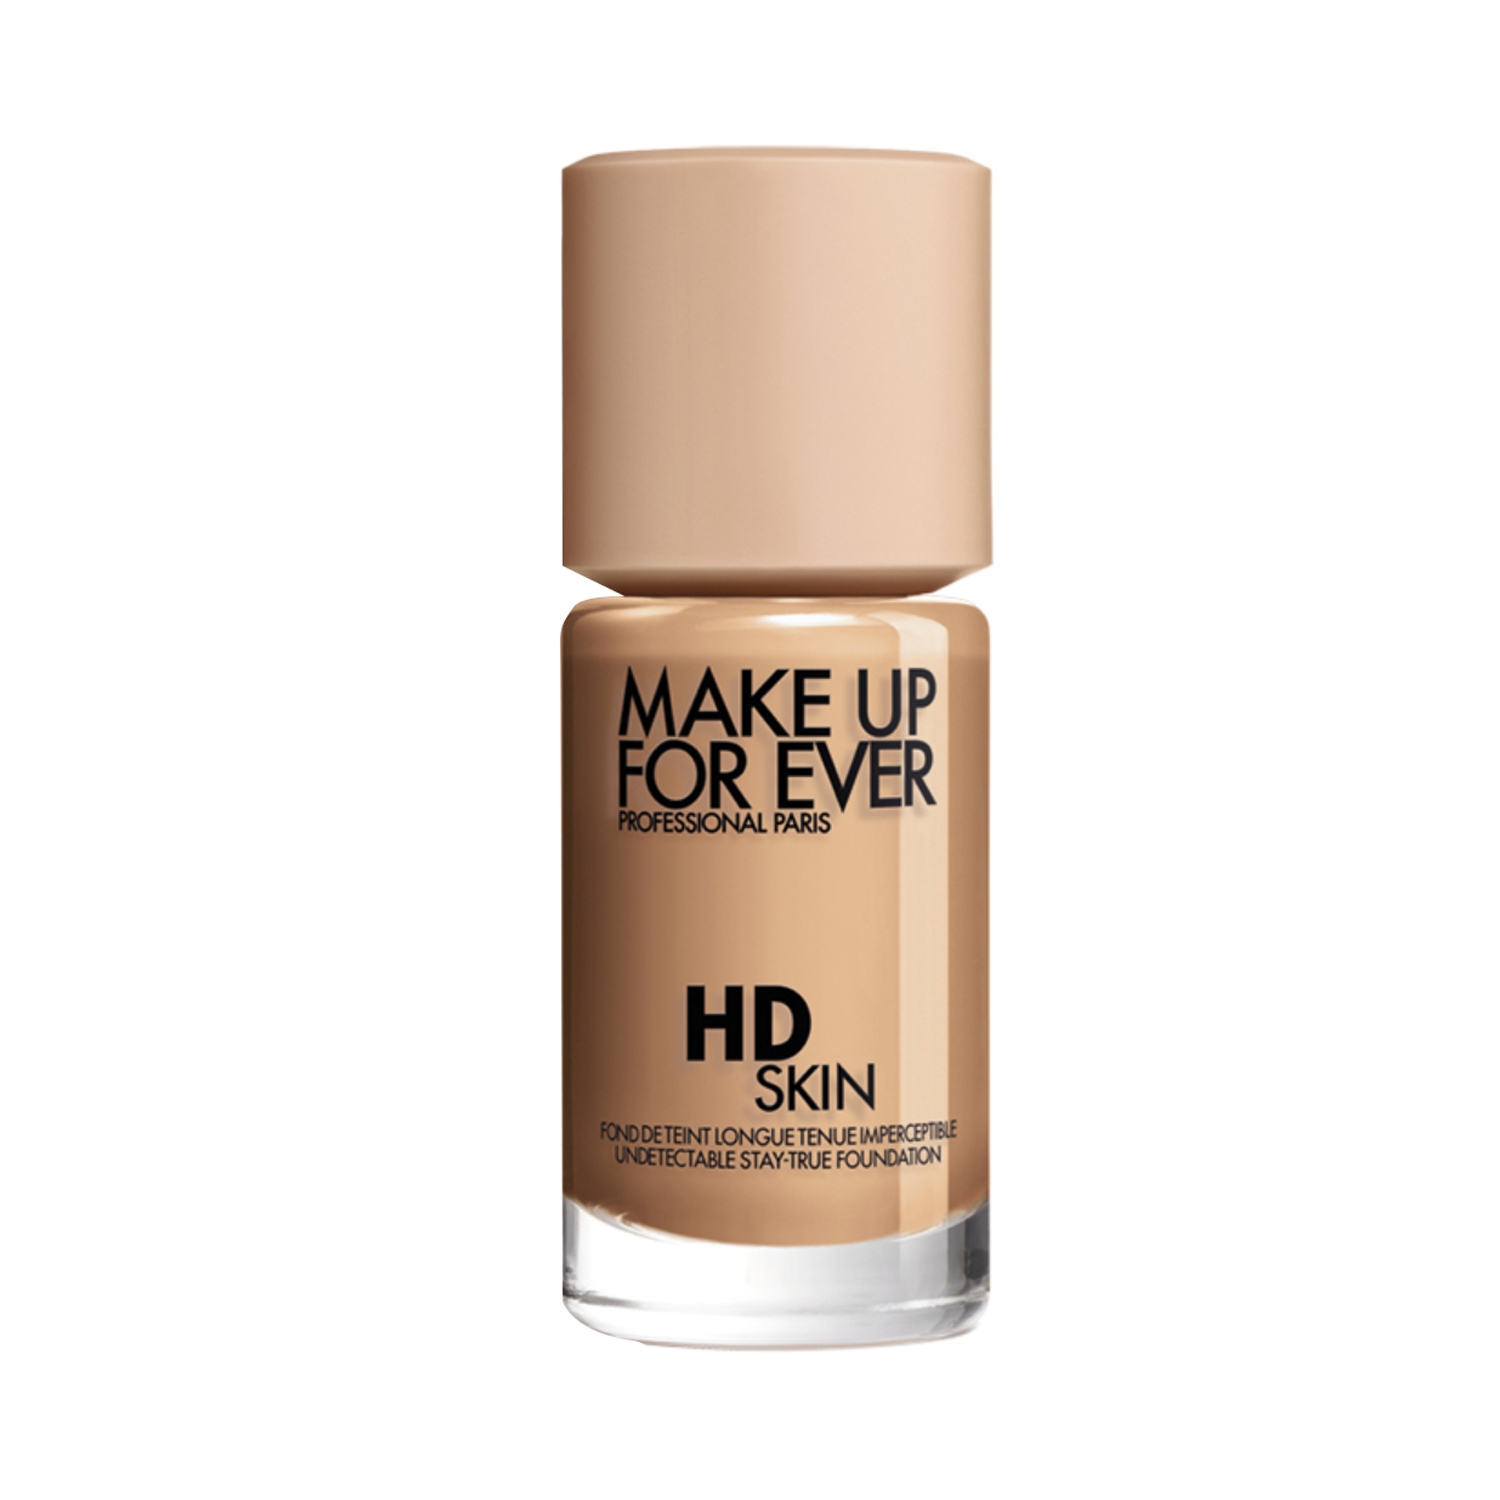 Make Up For Ever | Make Up For Ever Hd Skin Foundation-2Y32 (Y335) (30ml)